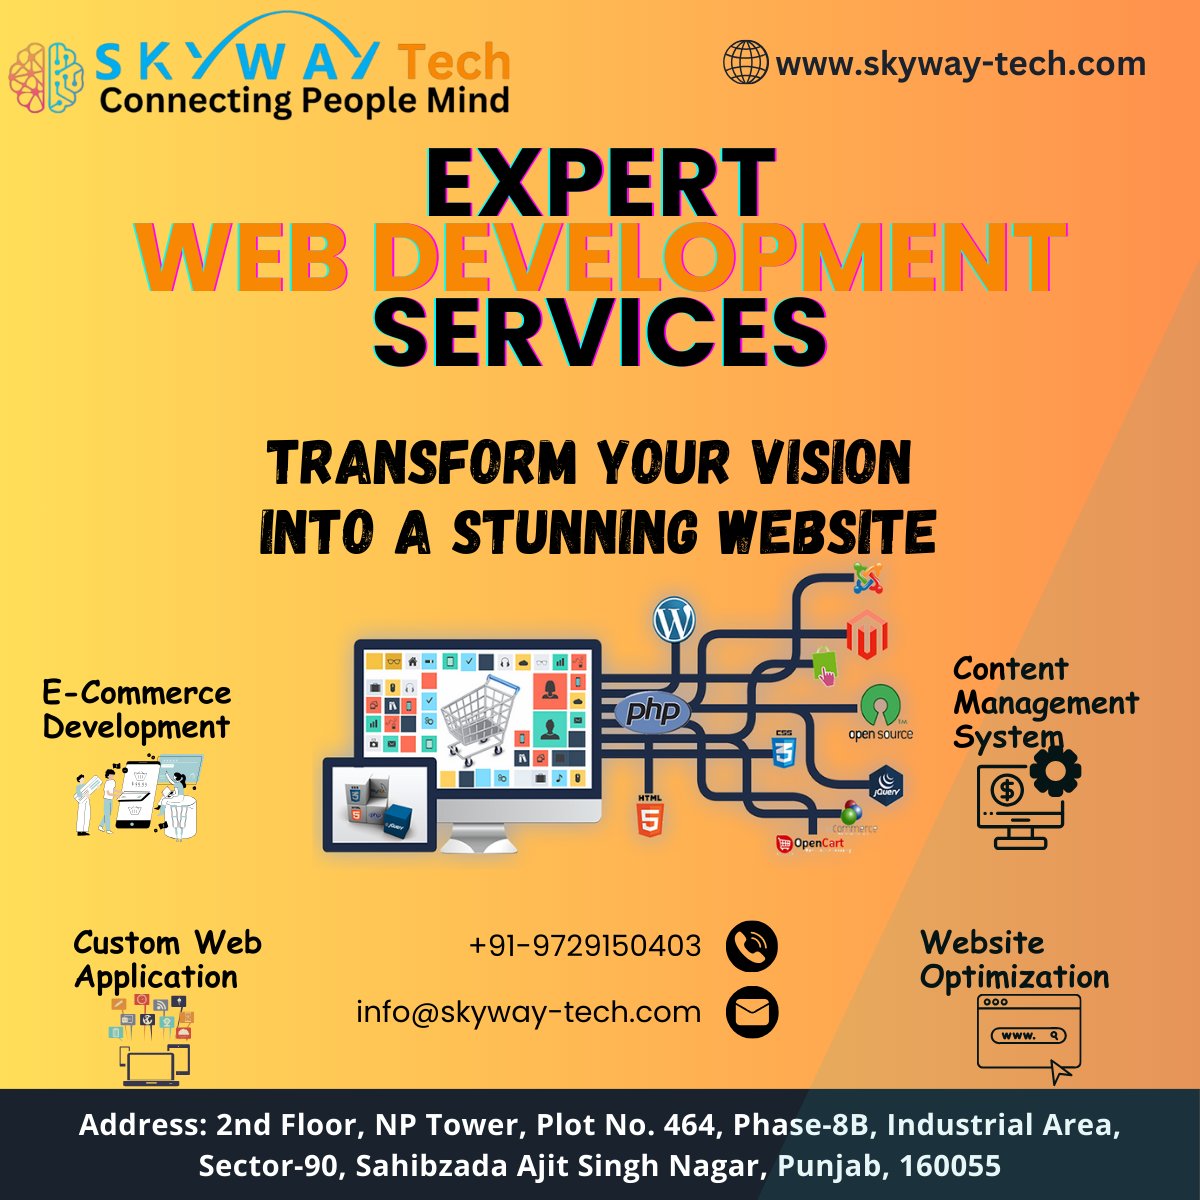 At Skyway Technologies, we believe in a partnership that goes beyond traditional business models. Your success is our success, and our commitment to excellence ensures that together, we build not just websites but thriving ventures. #SkywayTech #WebDevelopment #BusinessGrowth